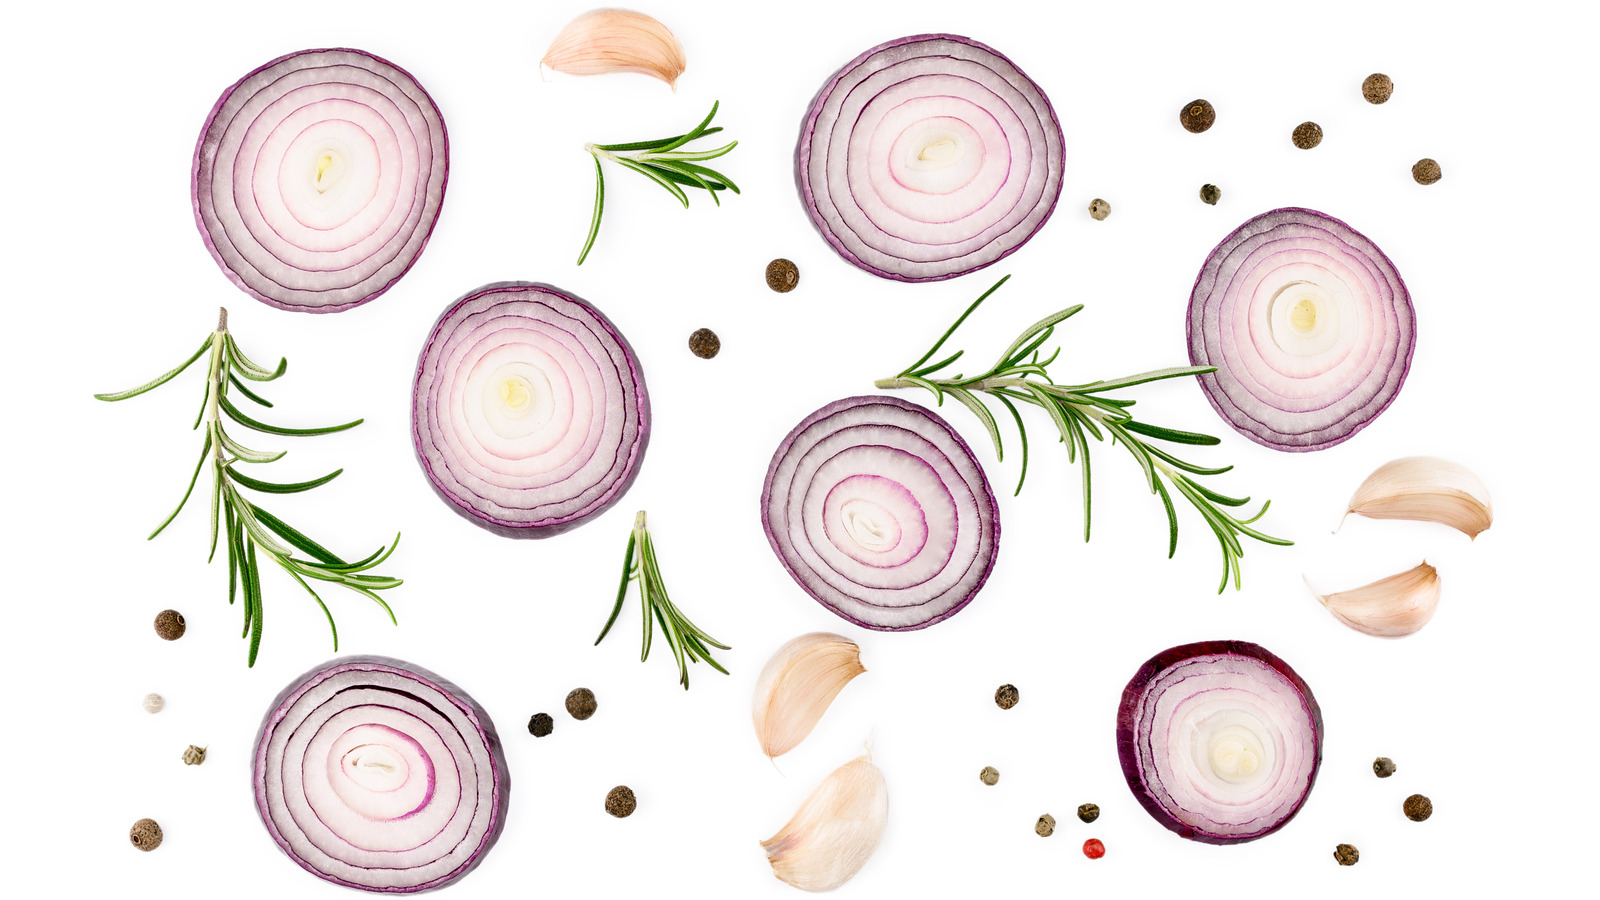 https://www.tastingtable.com/img/gallery/tips-you-need-when-cooking-with-onions/l-intro-1658868674.jpg